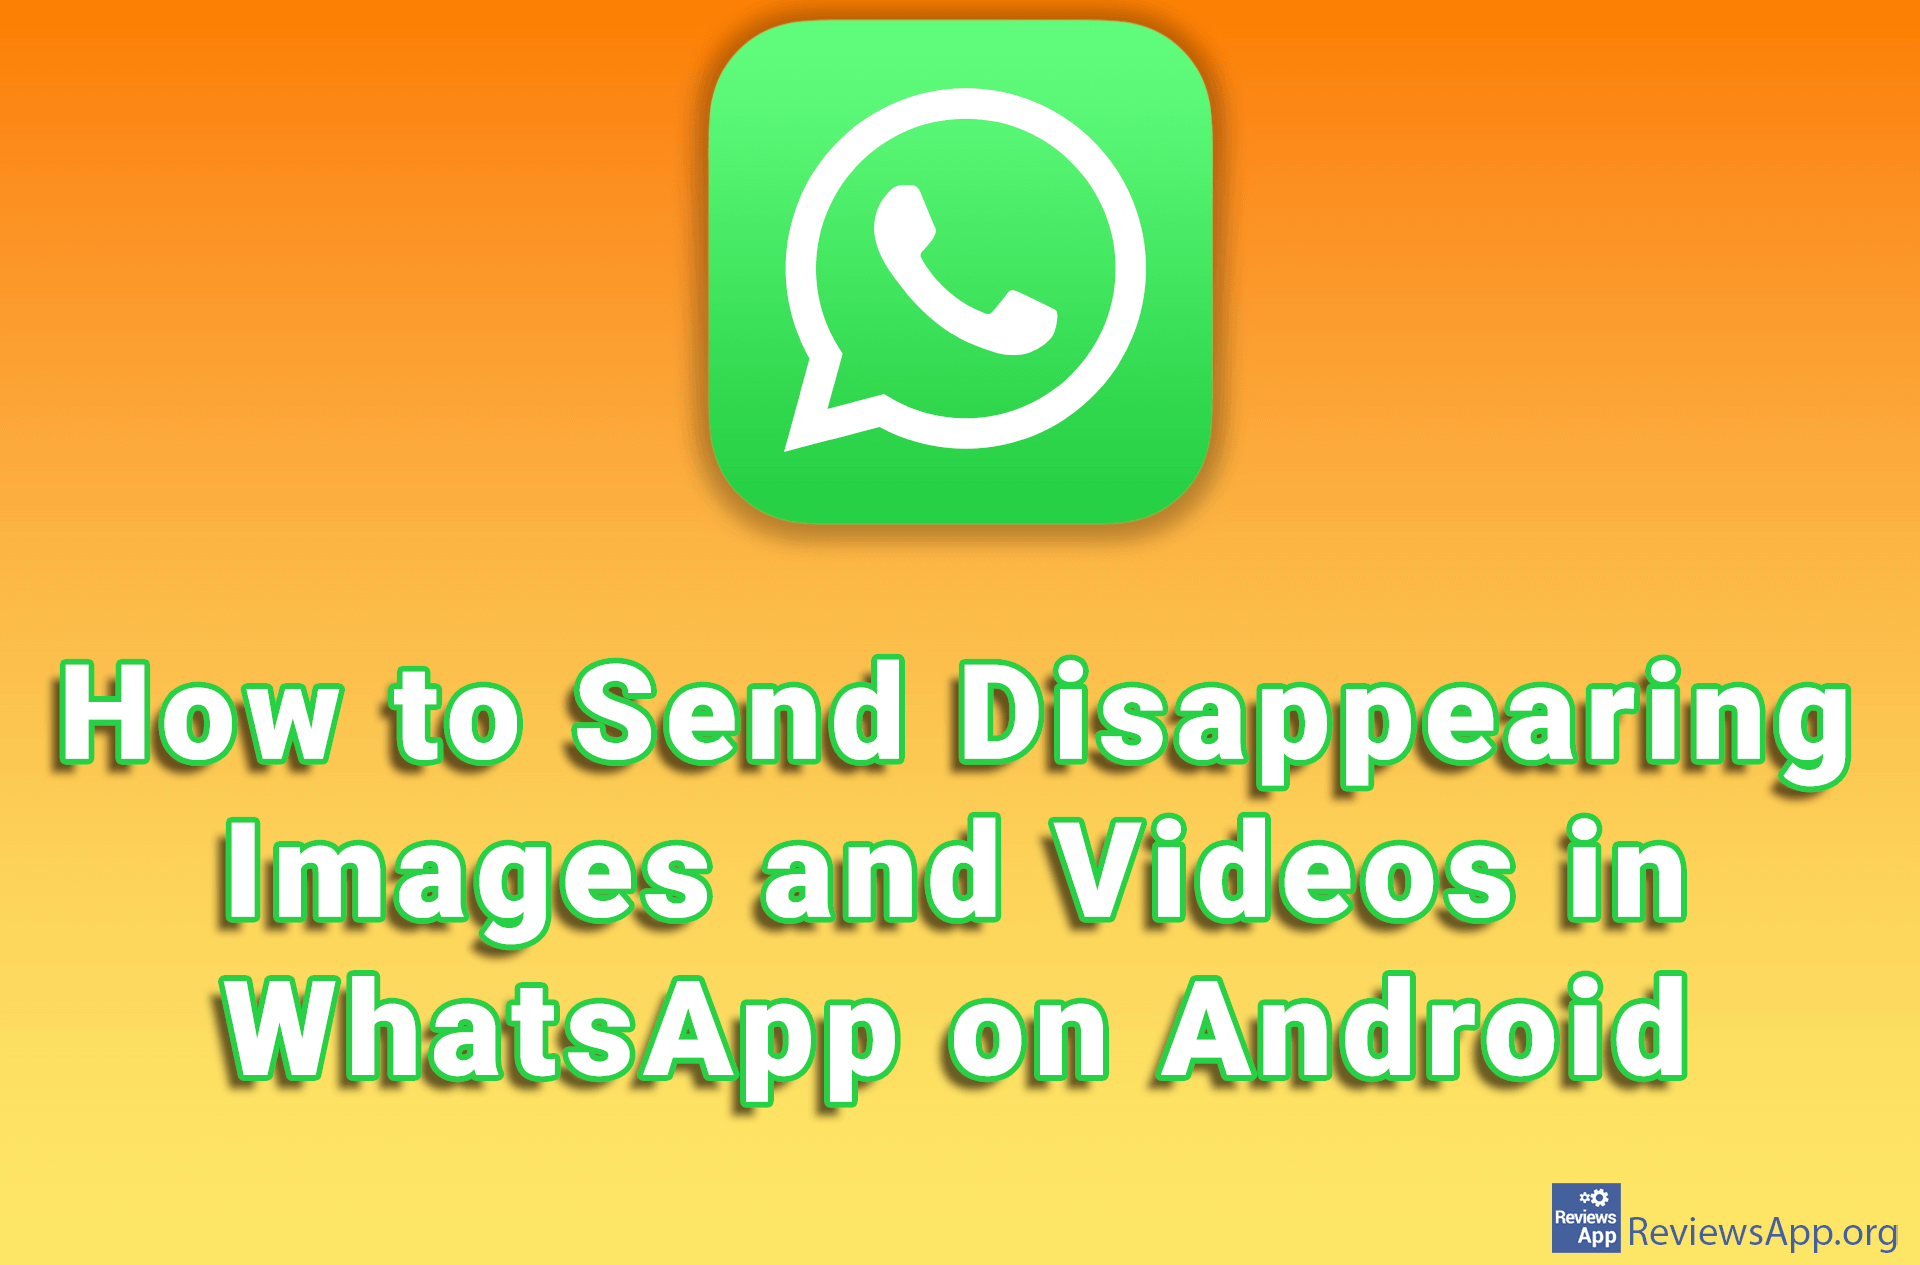 How to Send Disappearing Images and Videos in WhatsApp on Android